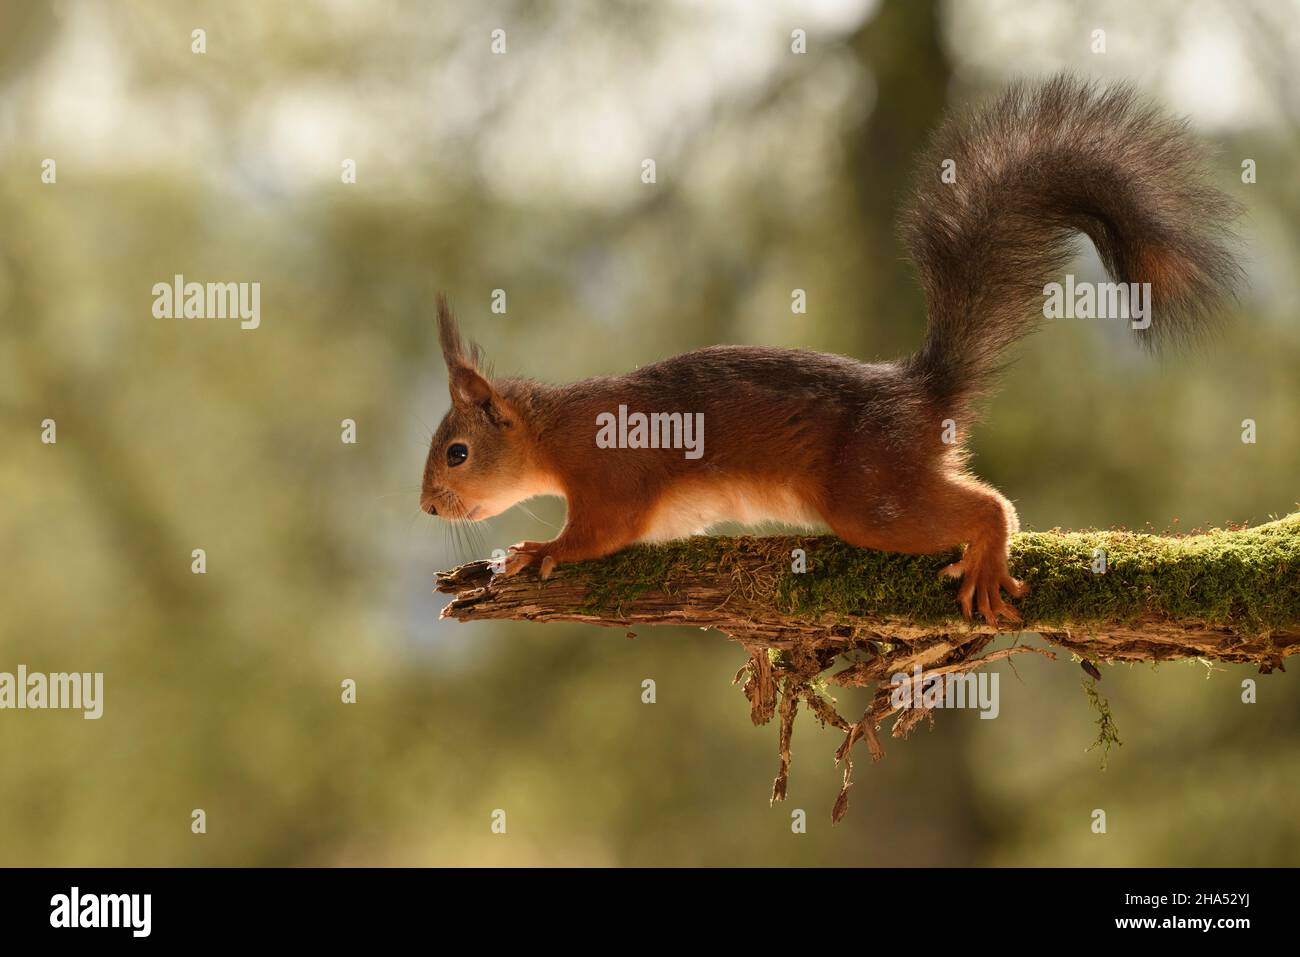 red squirrel is standing on a branch with moss looking out Stock Photo